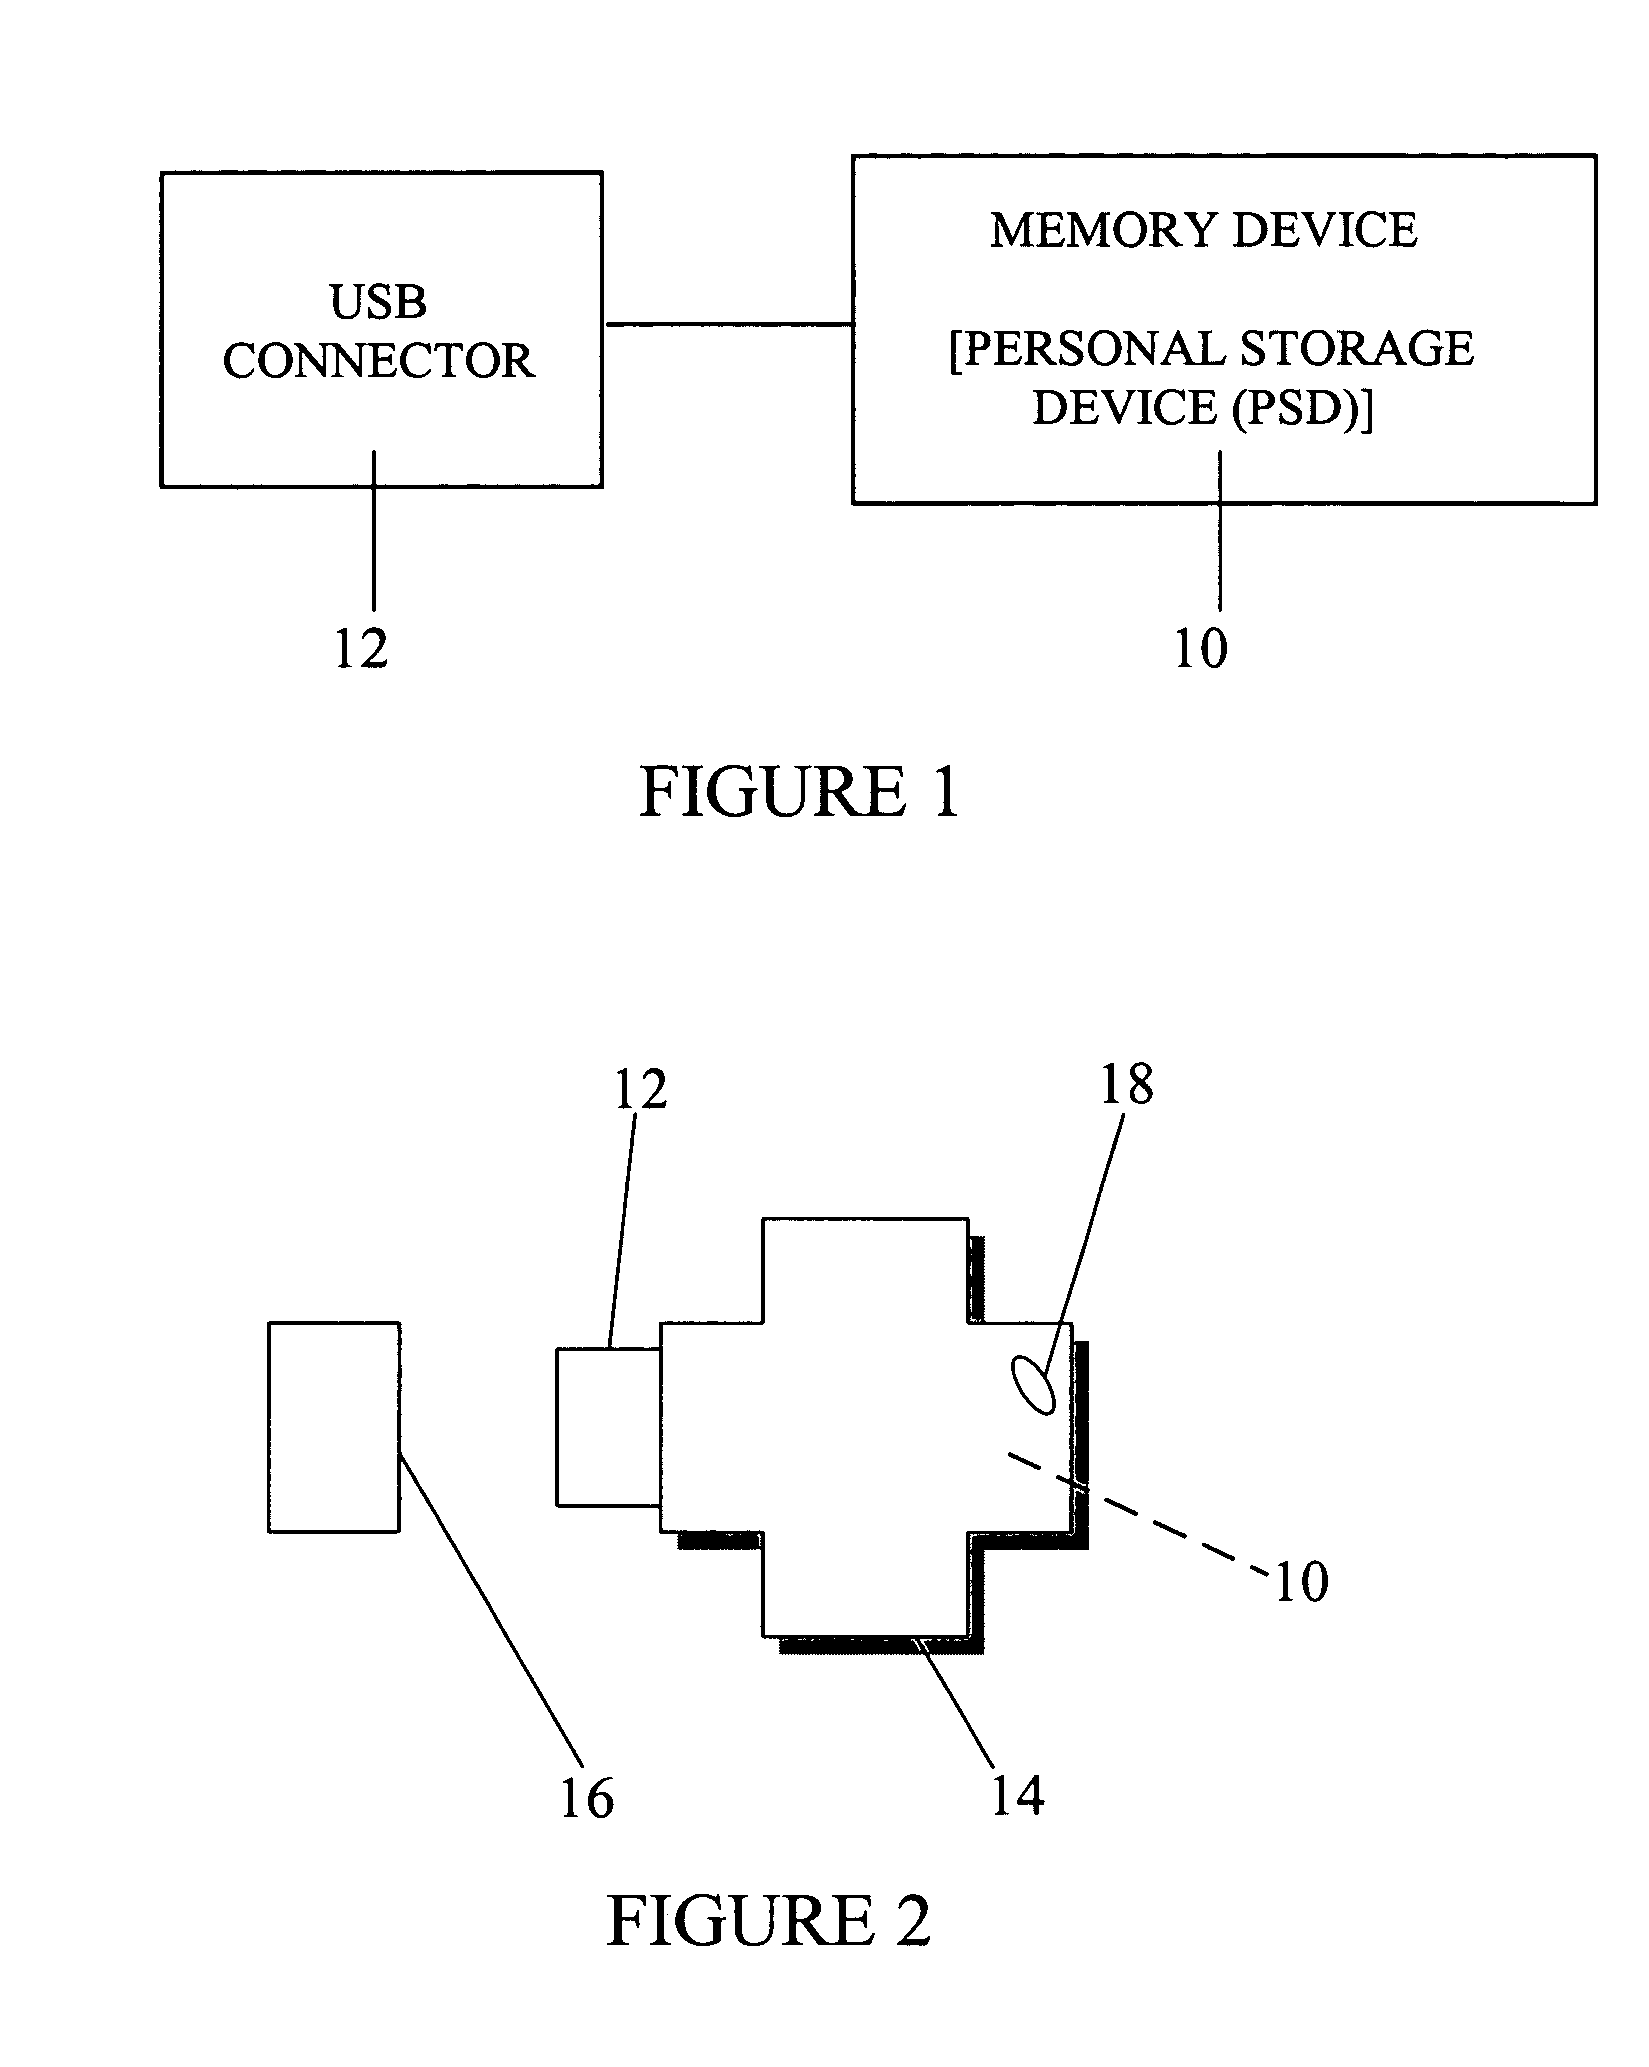 Apparatus and method for storing, transporting and providing emergency personnel with critical user specific information